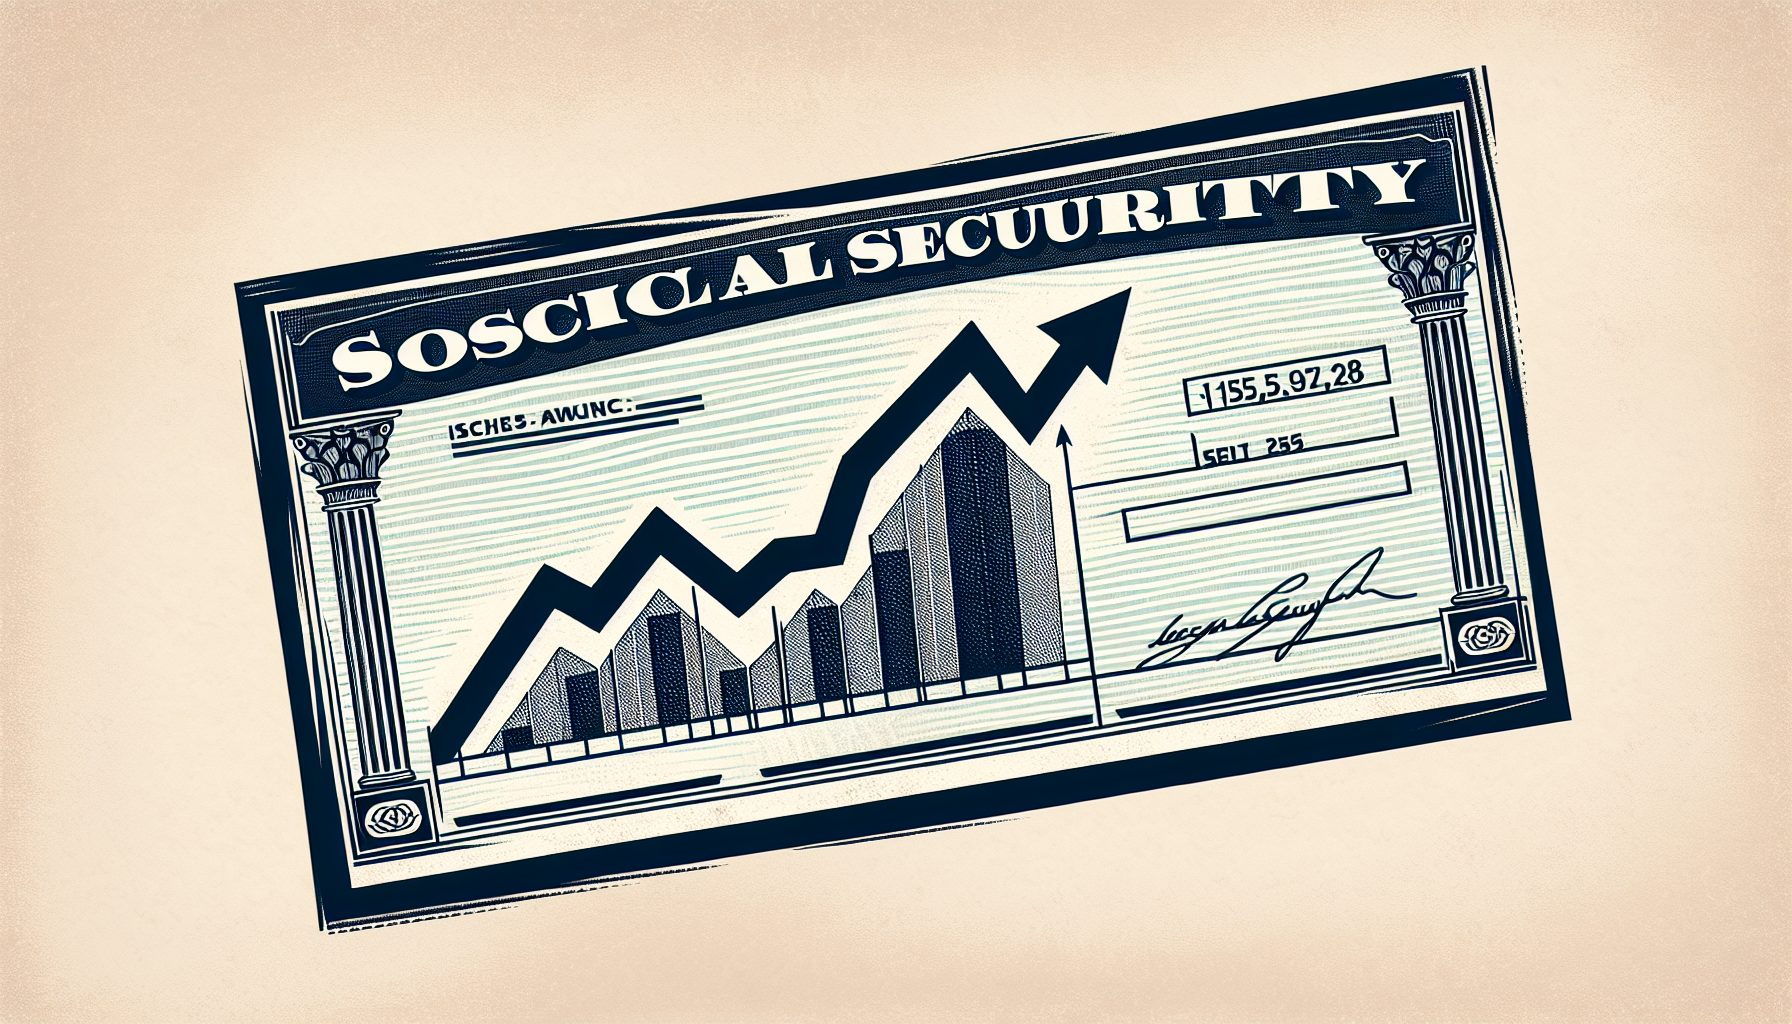 "Social Security Boost"